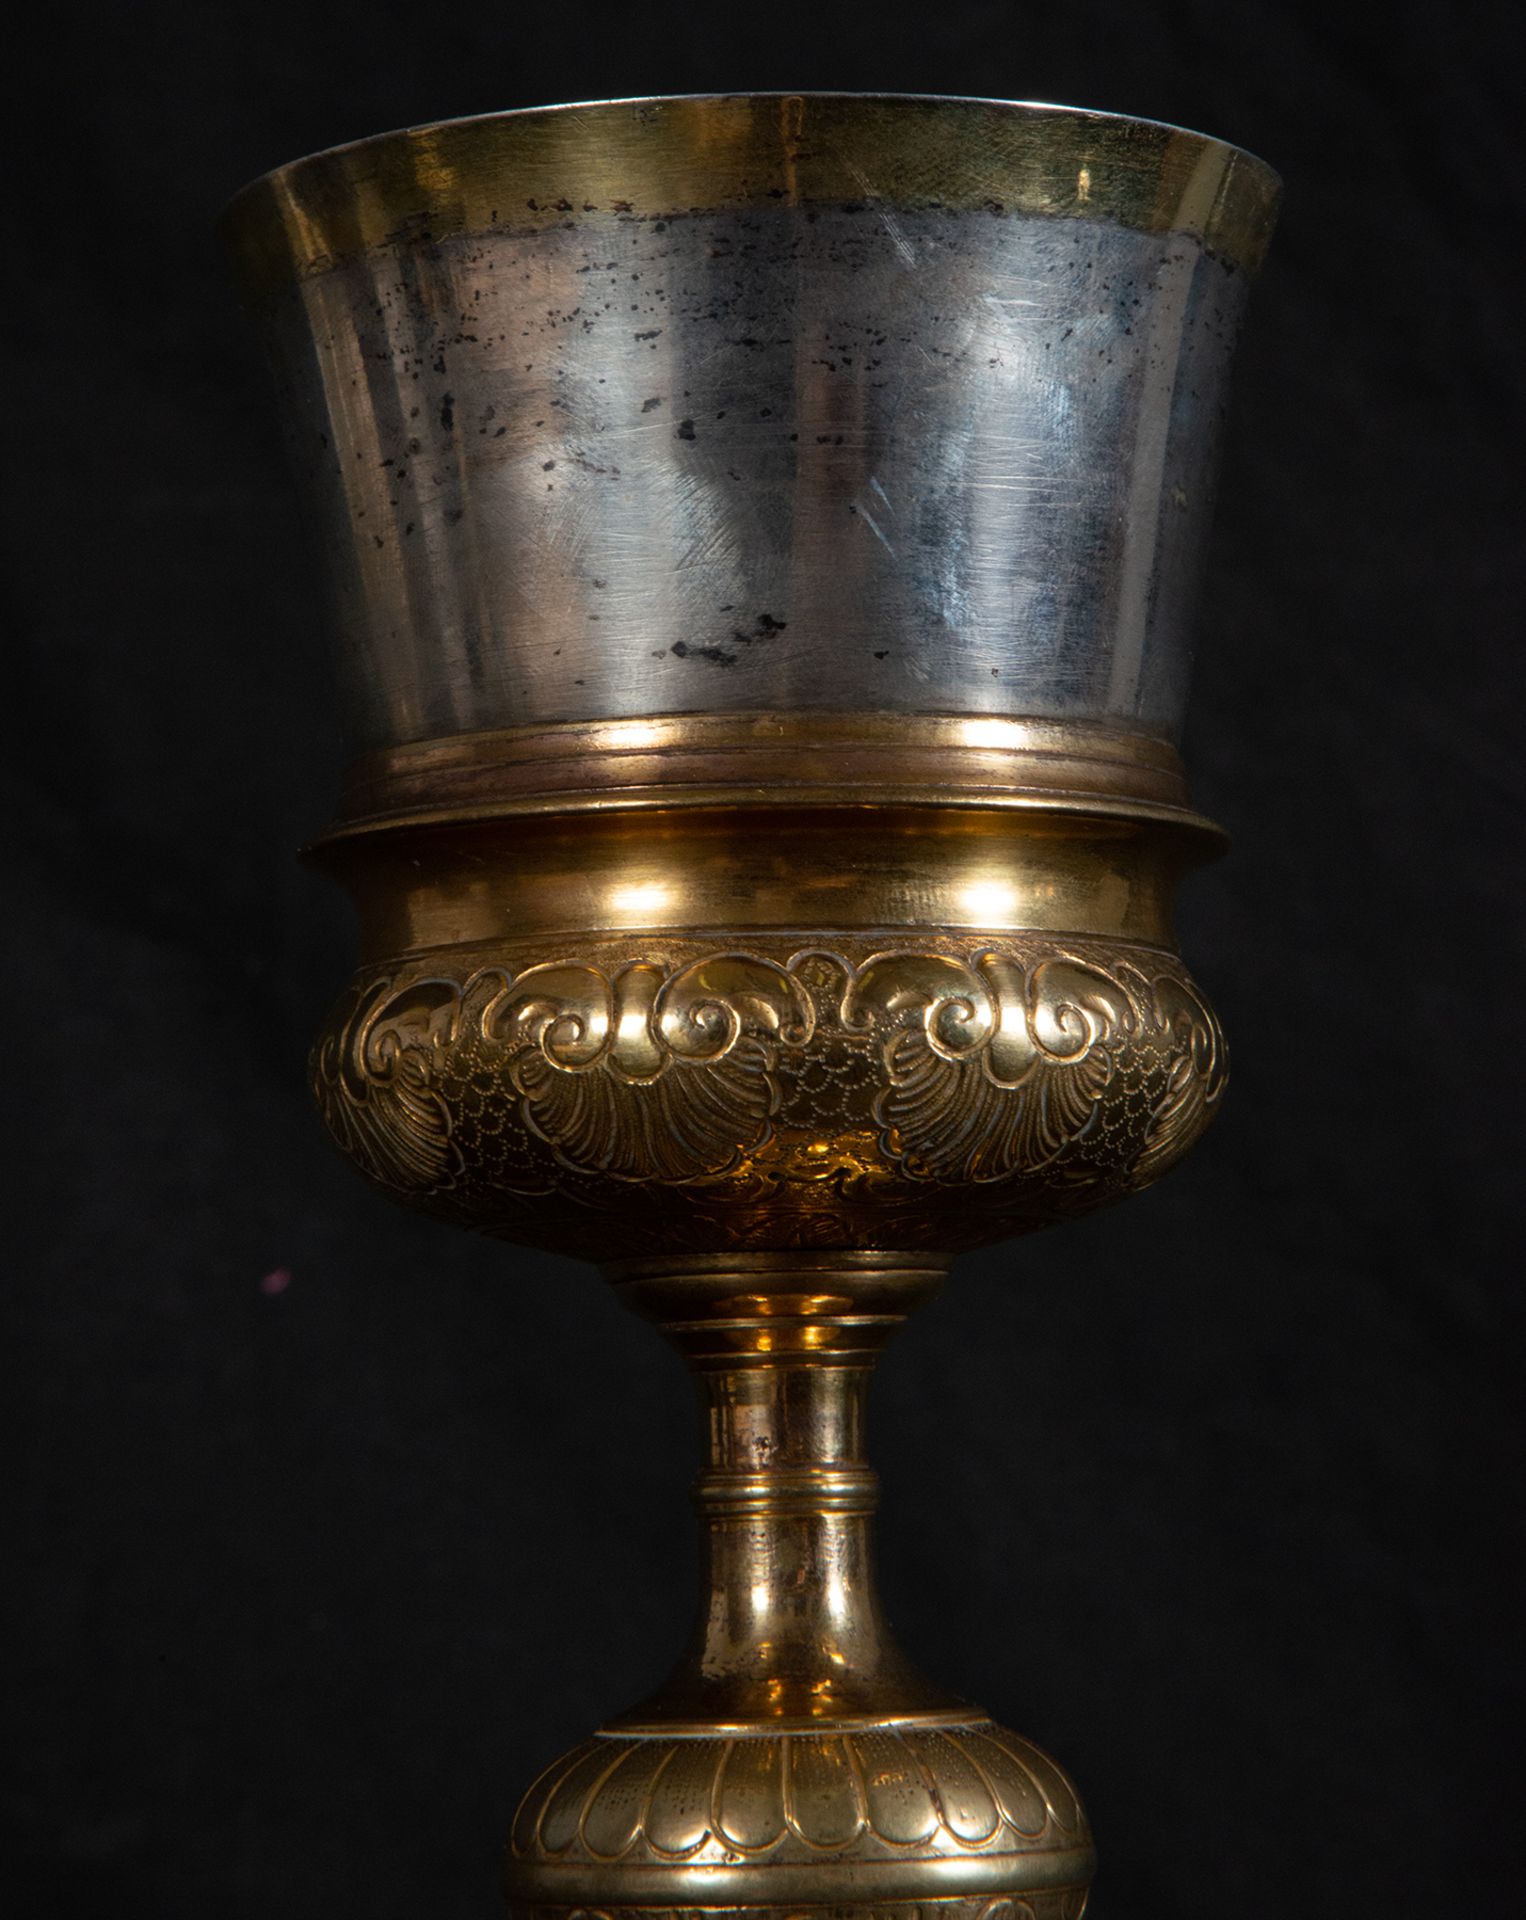 Chalice in silver gilt, 17th century - Image 5 of 6